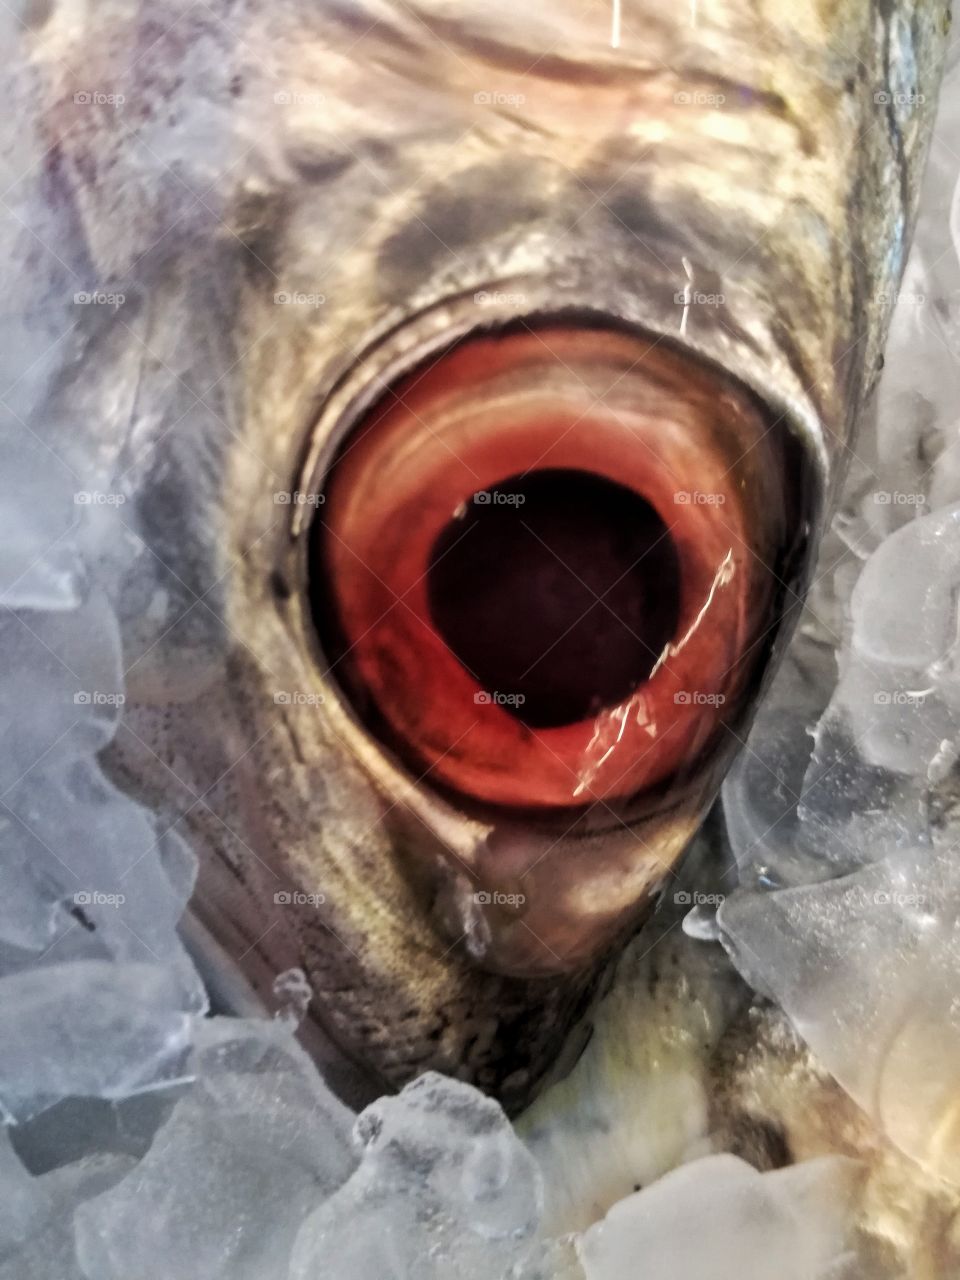 fish, market, ais cube, red eye, food, store